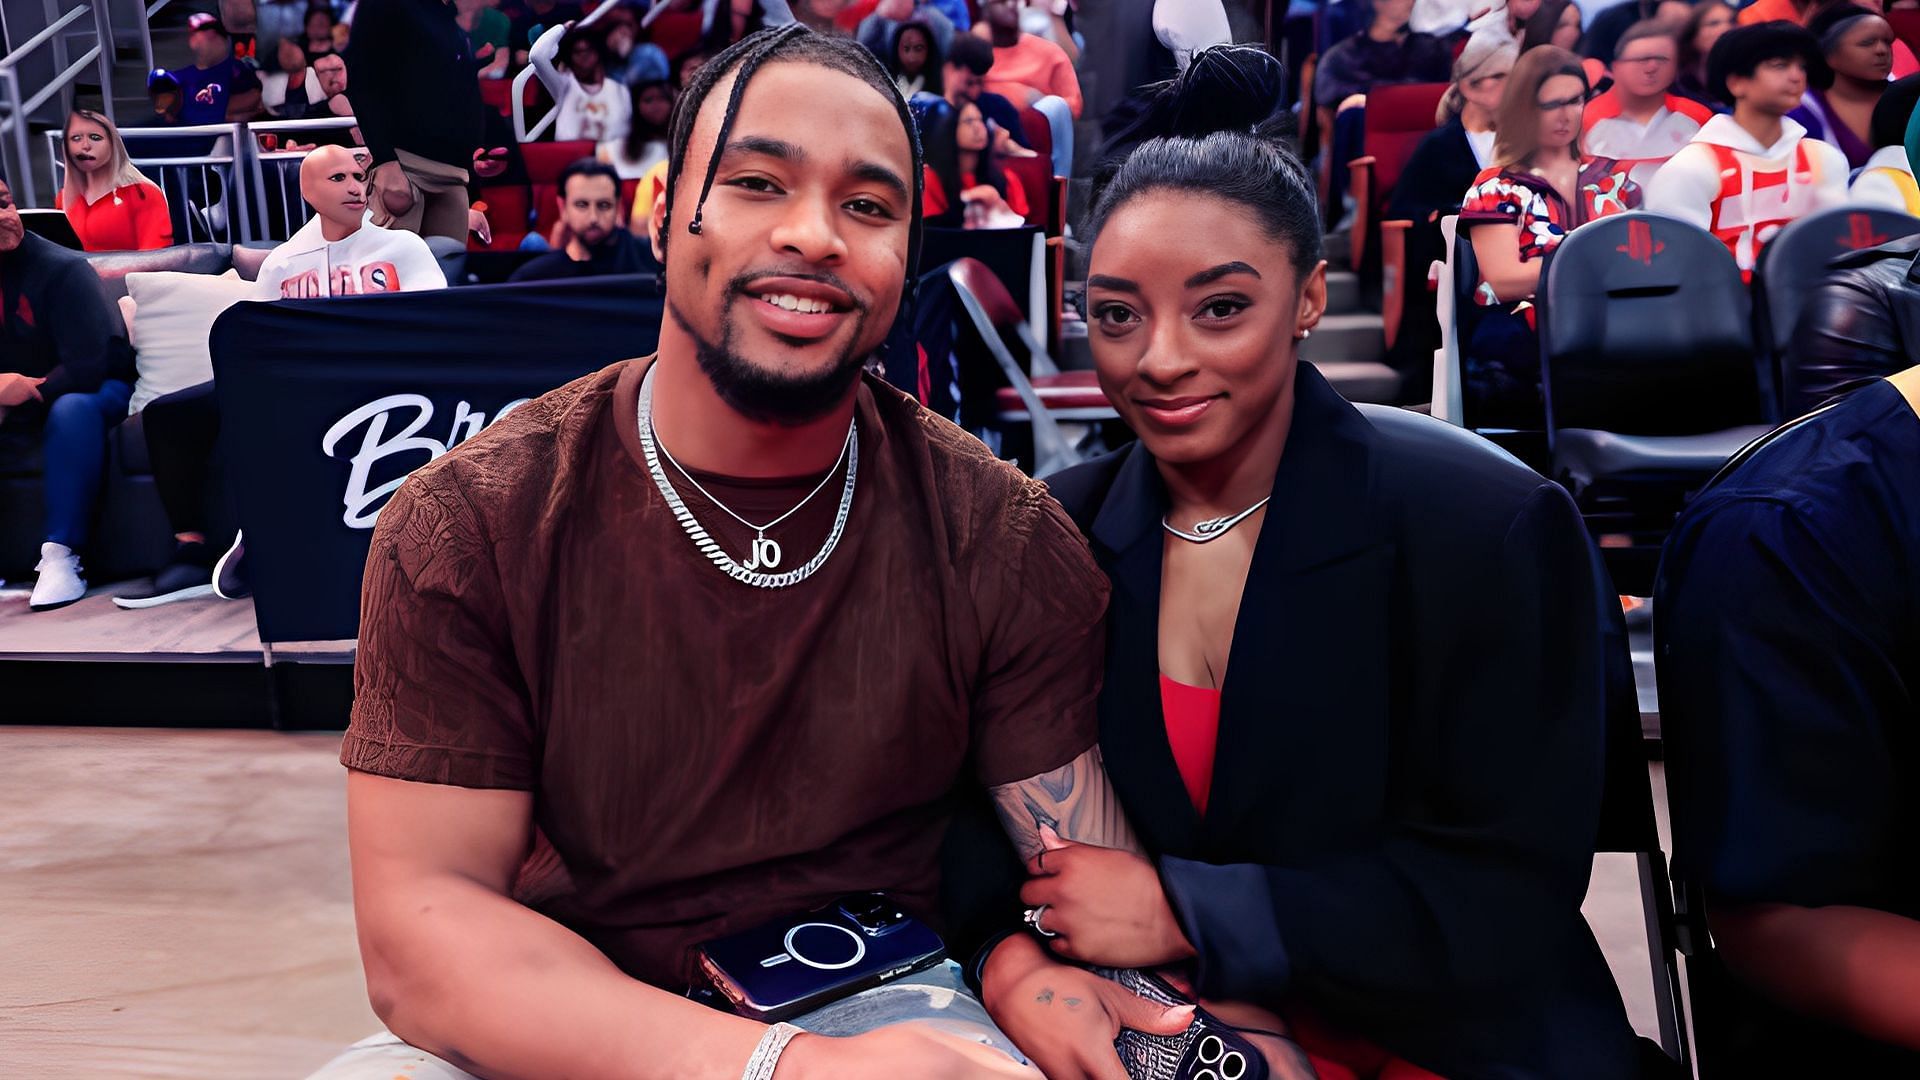 Simone Biles shares glimpses of date night with husband Jonathan Owens (Image via Getty)